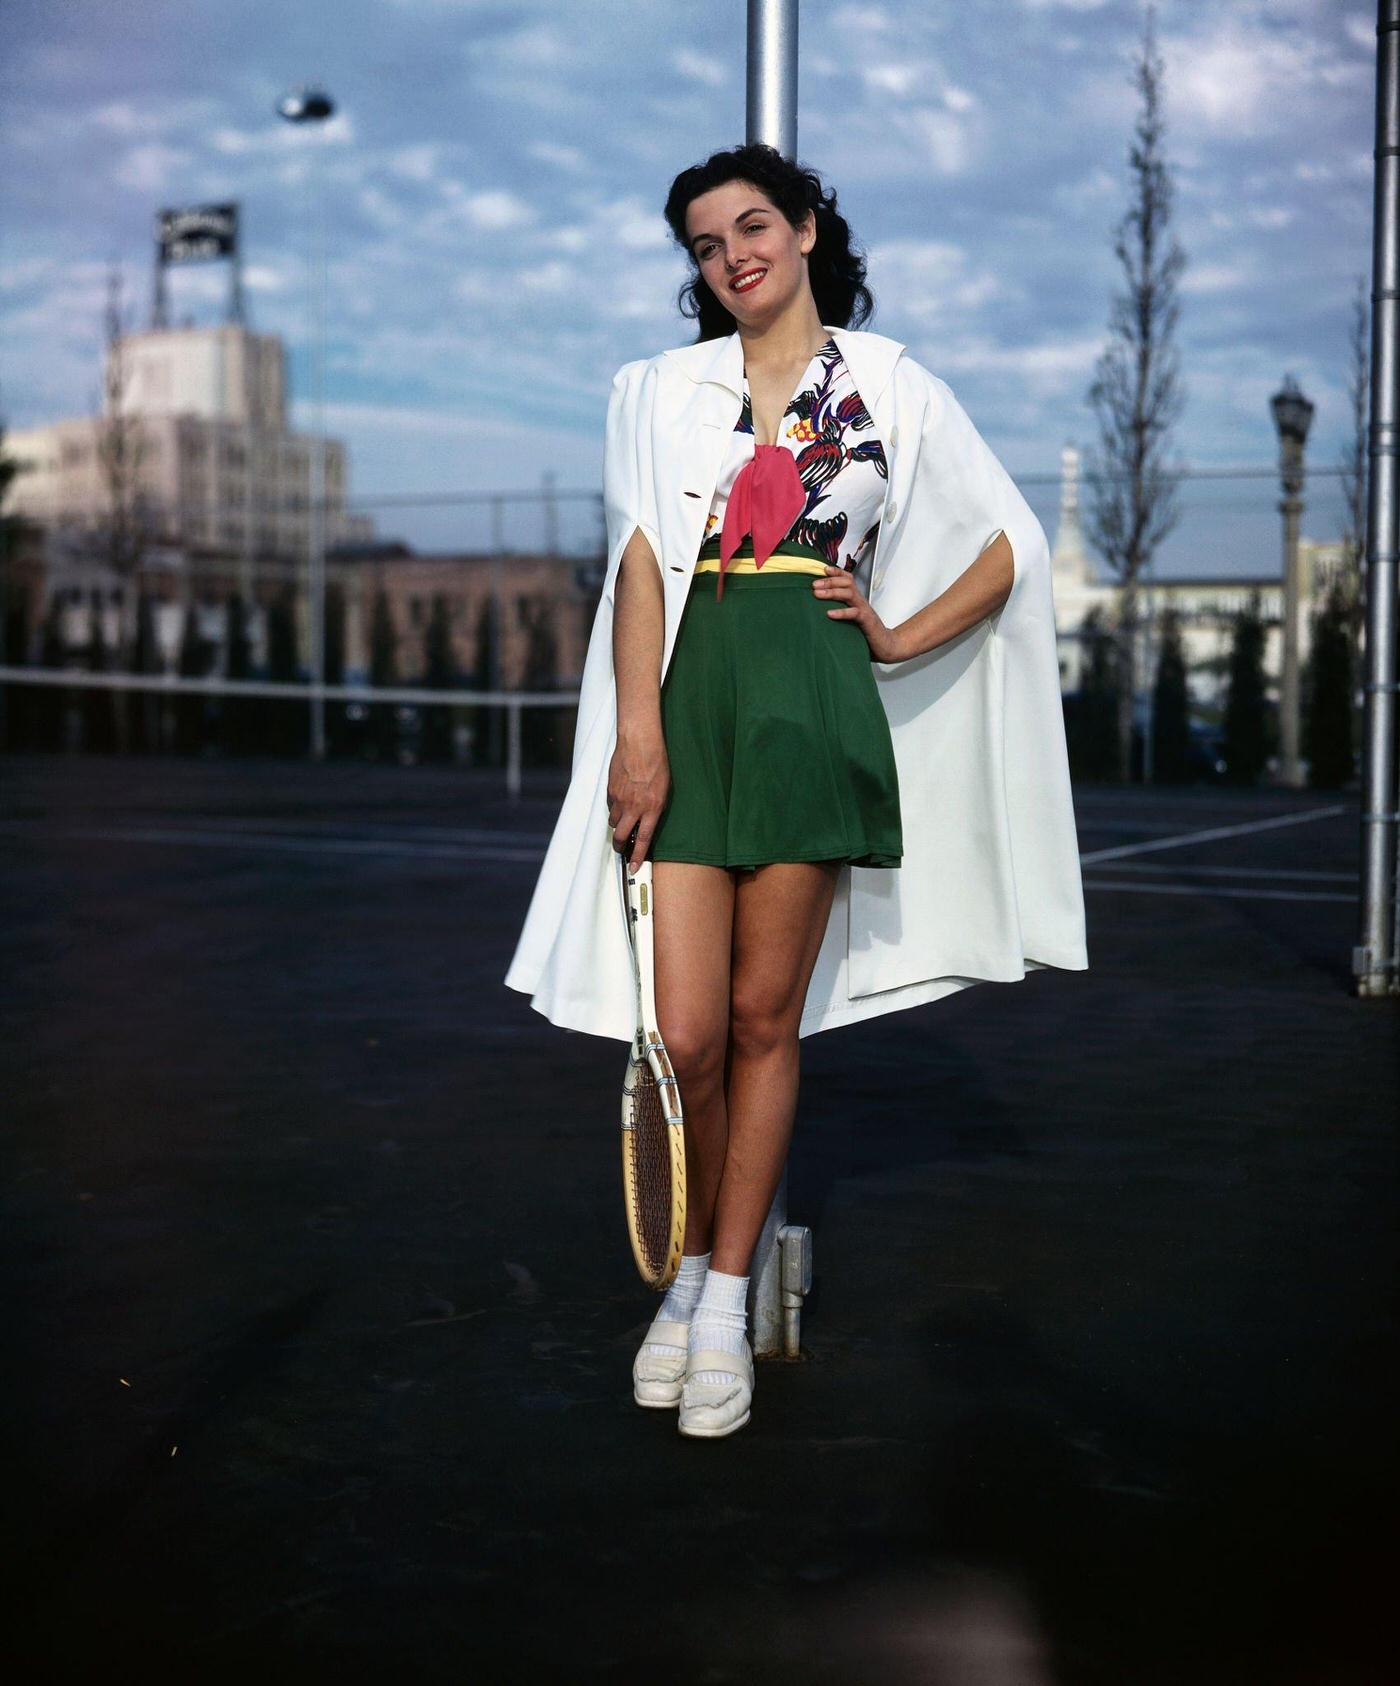 Jane Russell, shortly after being chosen for the lead female role in The Outlaw